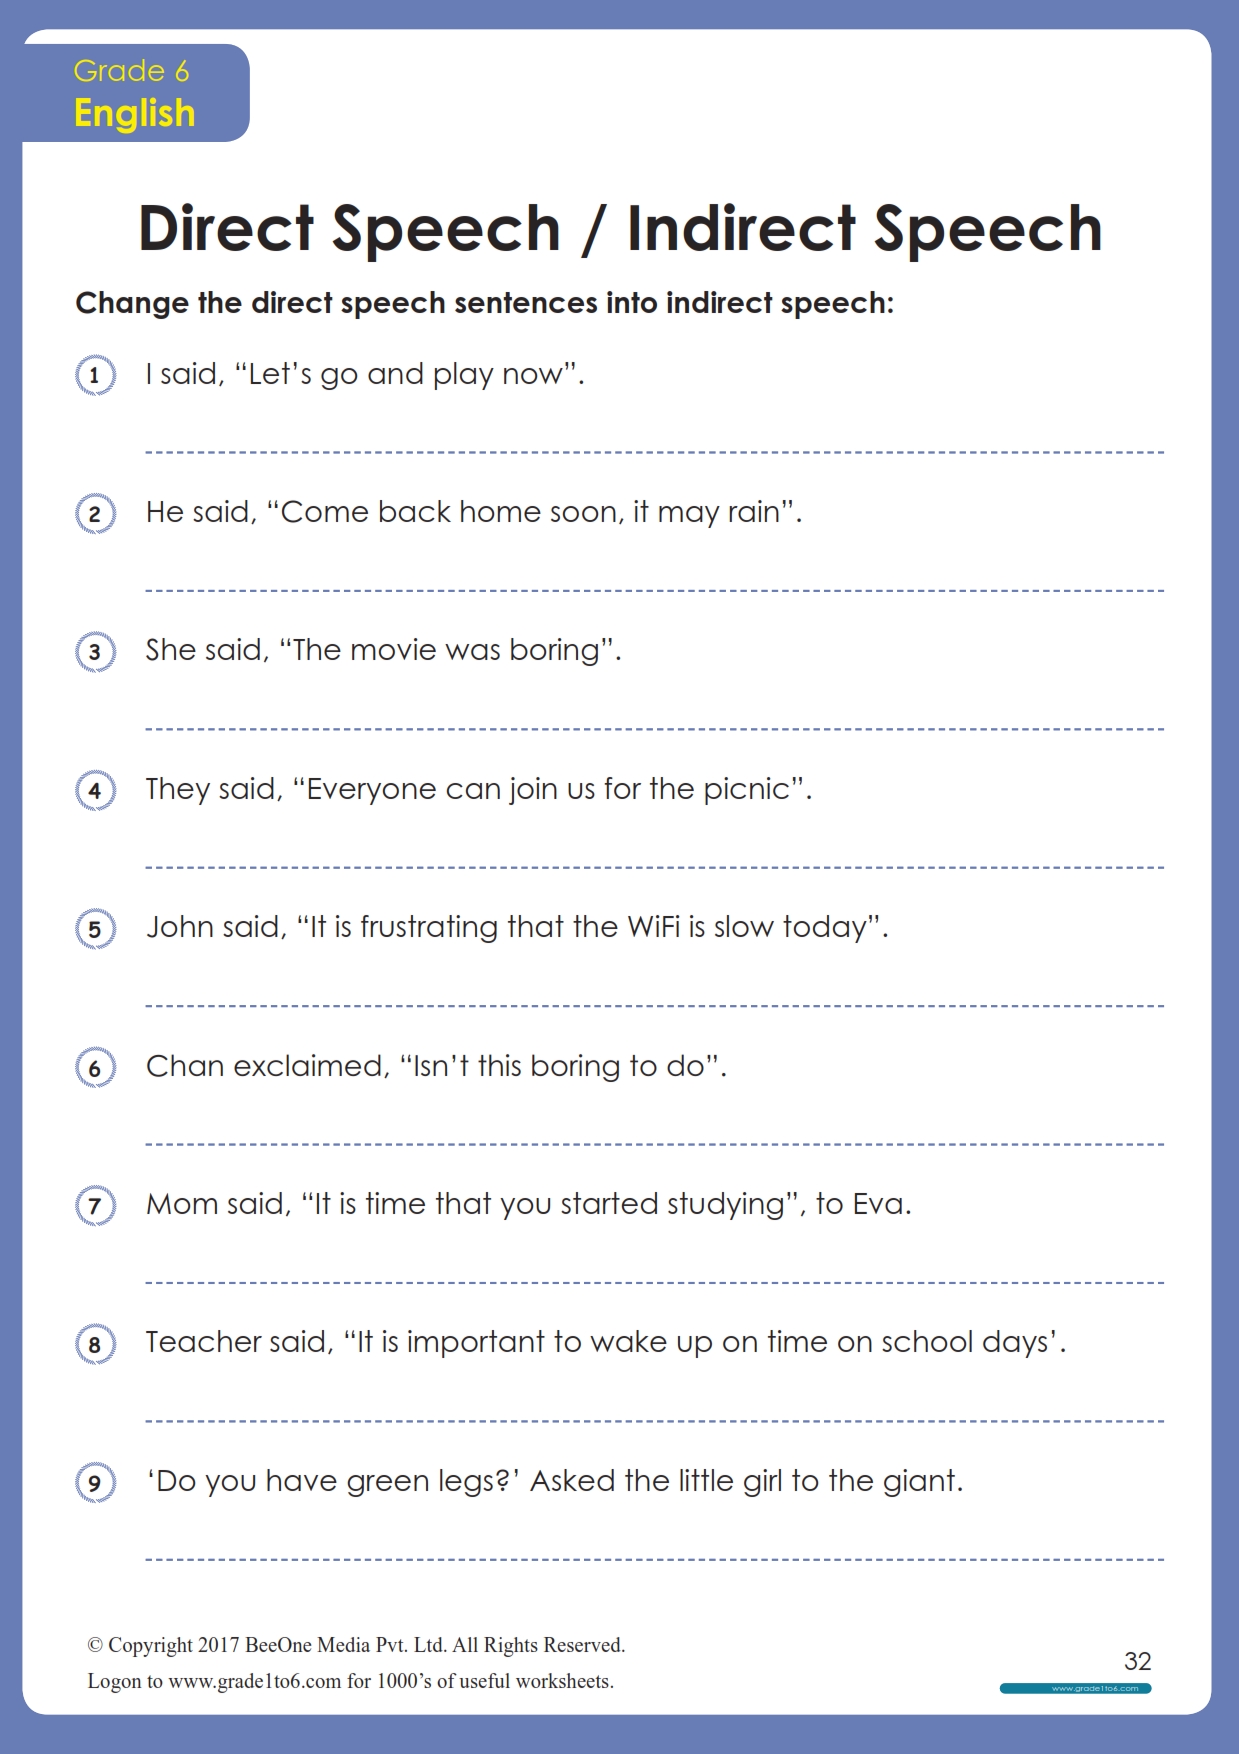 direct and indirect speech questions class 6